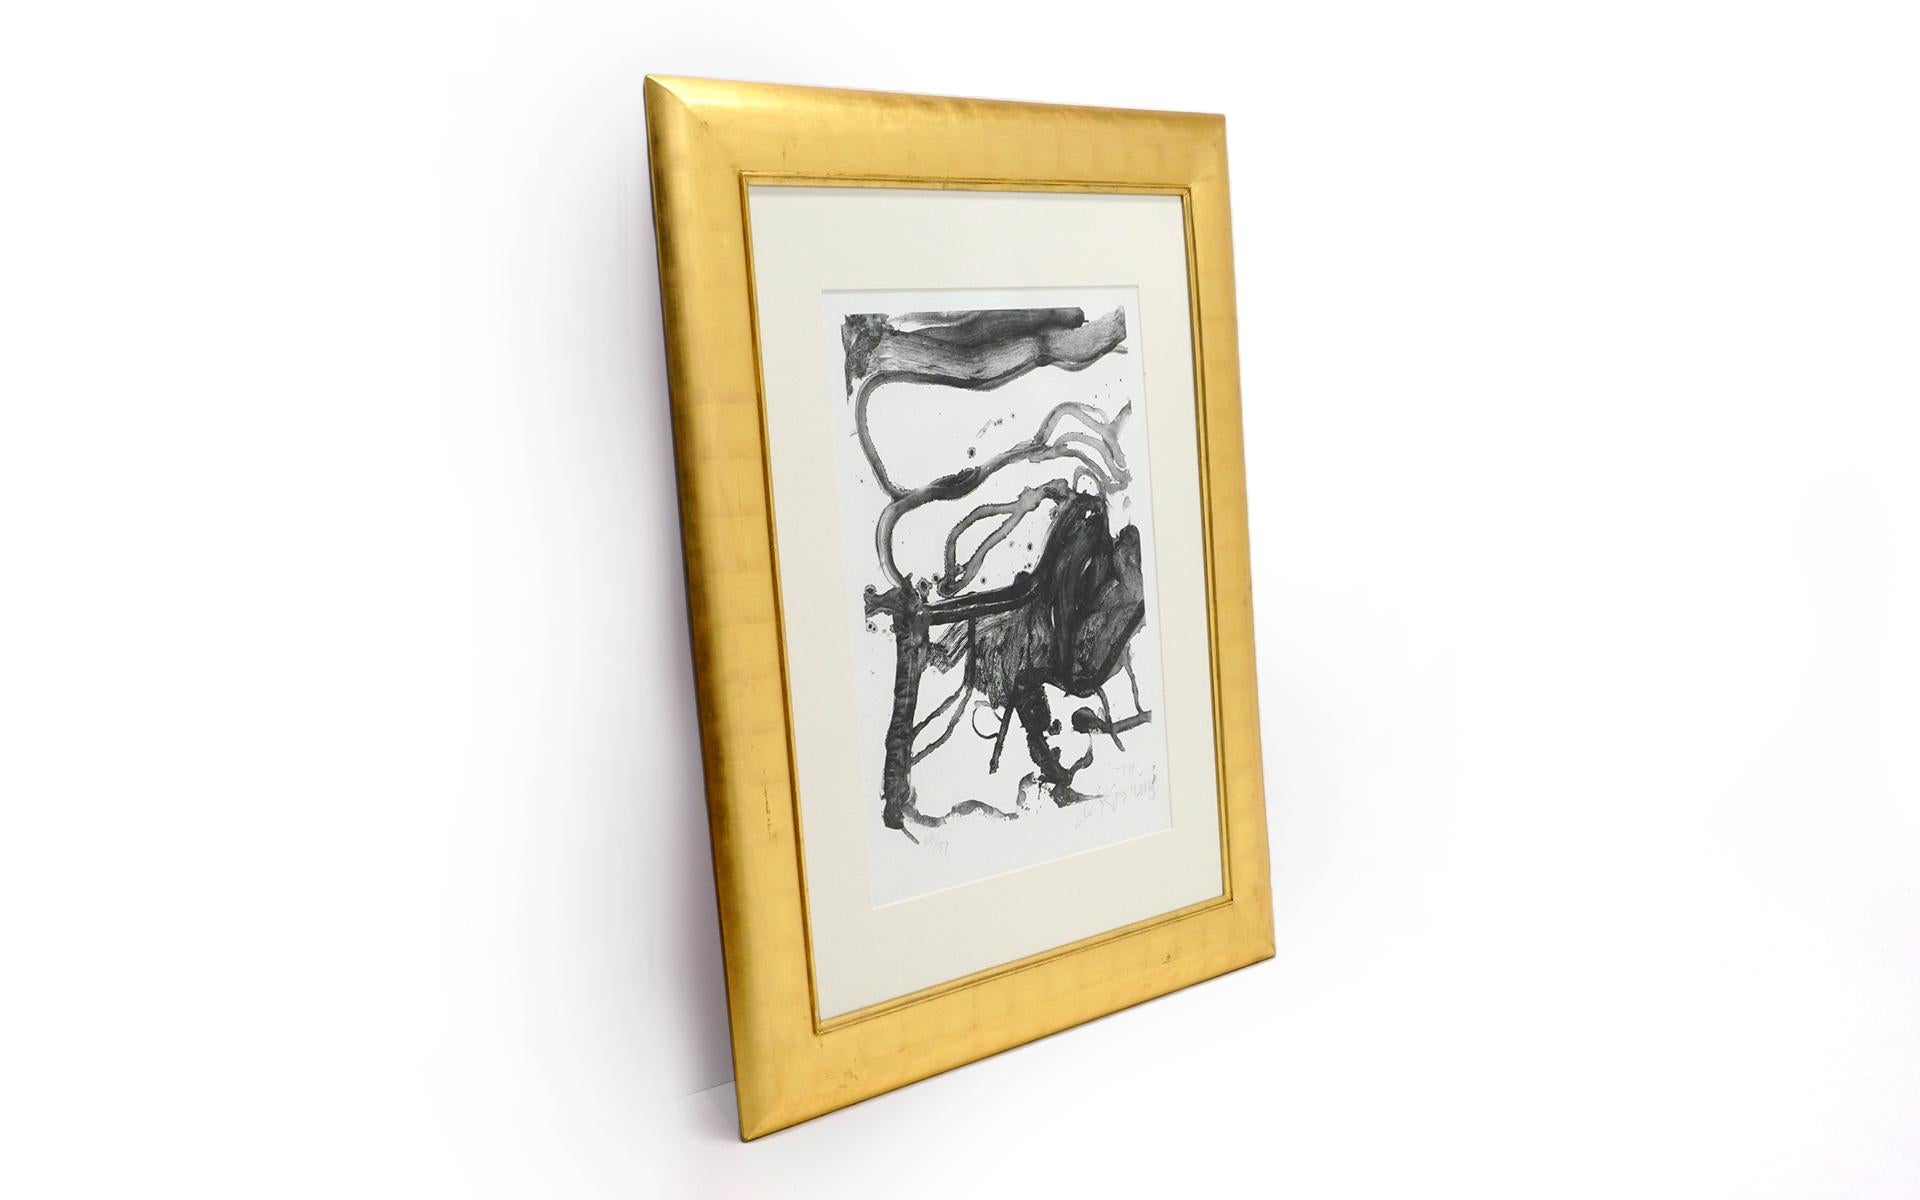 Willem De Kooning (Dutch-American, 1904-1997)
High school desk, 1970
Viscosity acid edged Lithograph print on Italia paper.
Signed, dated and numbered.
26 of an edition of 57.
Published by Knoedler, New York.
Oval embossed chop mark bottom